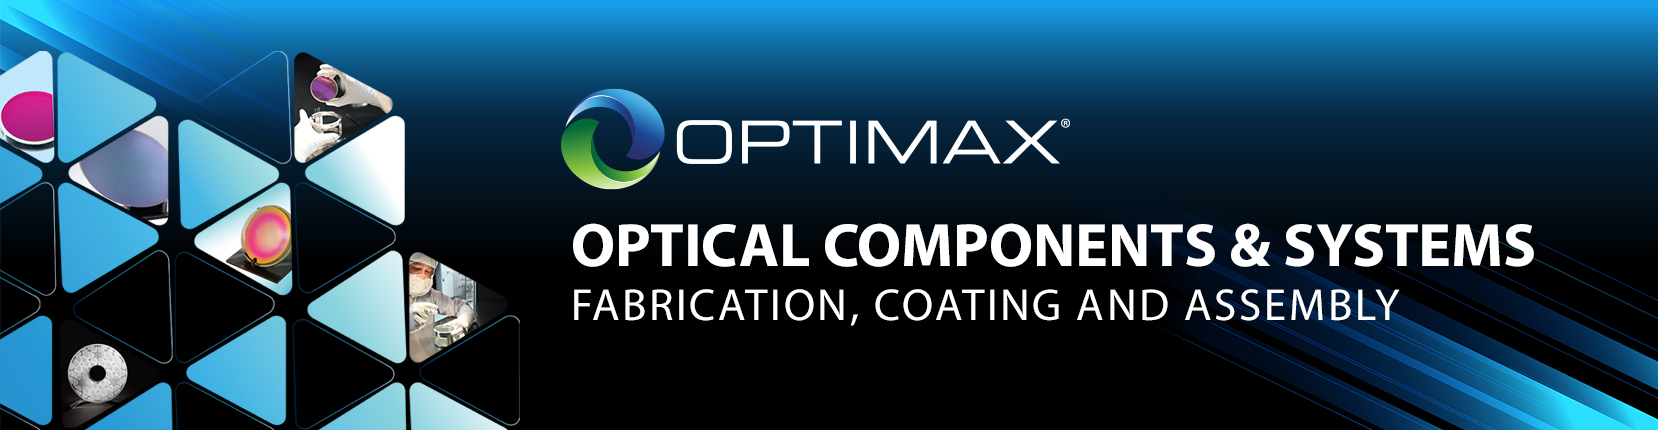 Optimax: Optical Components & Systems